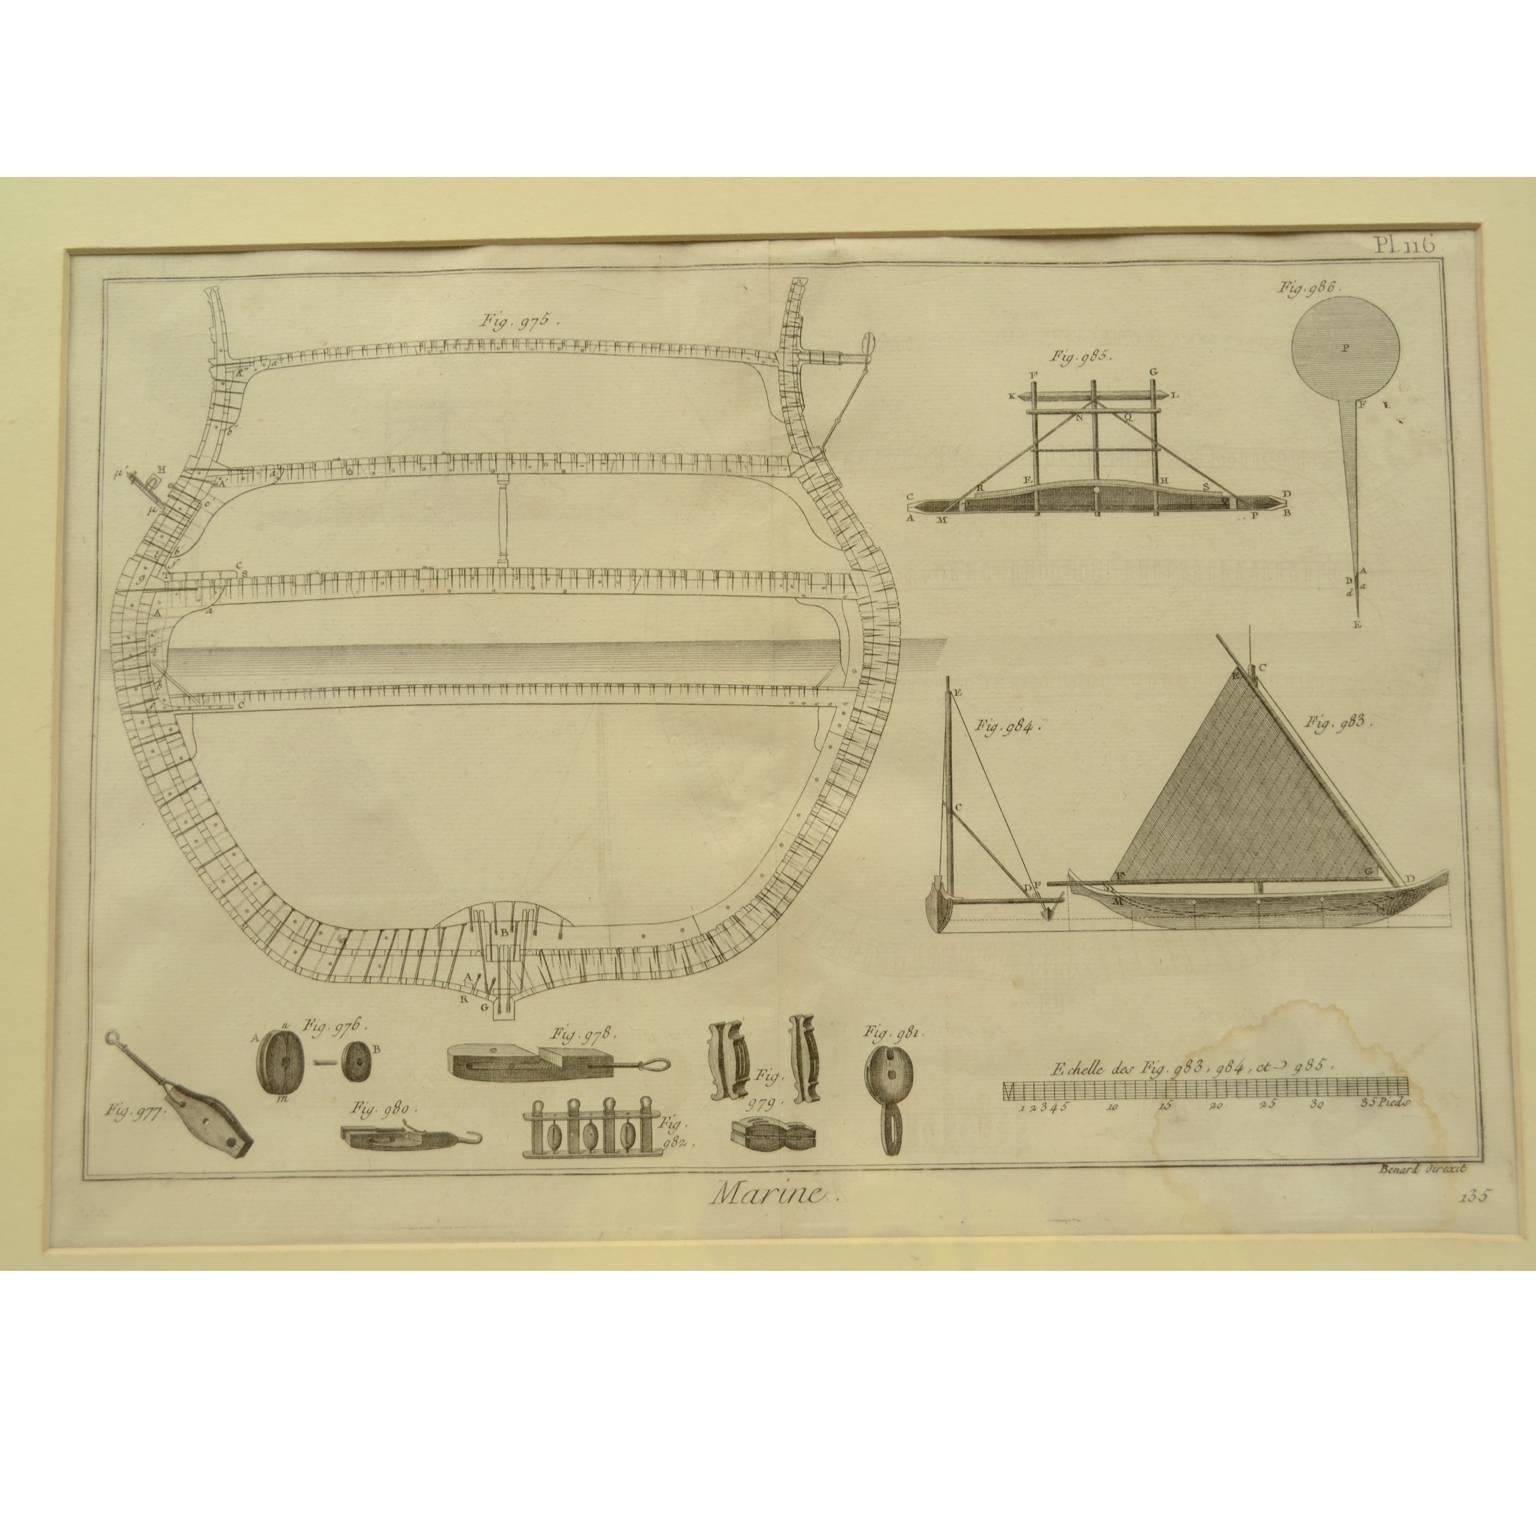 Print by engraving on copper plate from the Panckoucke Encyclopédie méthodique, end of the 18th century, volume Marine Planches (more than 1,500 figures dealing with all subjects on the marina: planes, construction, carpentry, tree trunks, armaments